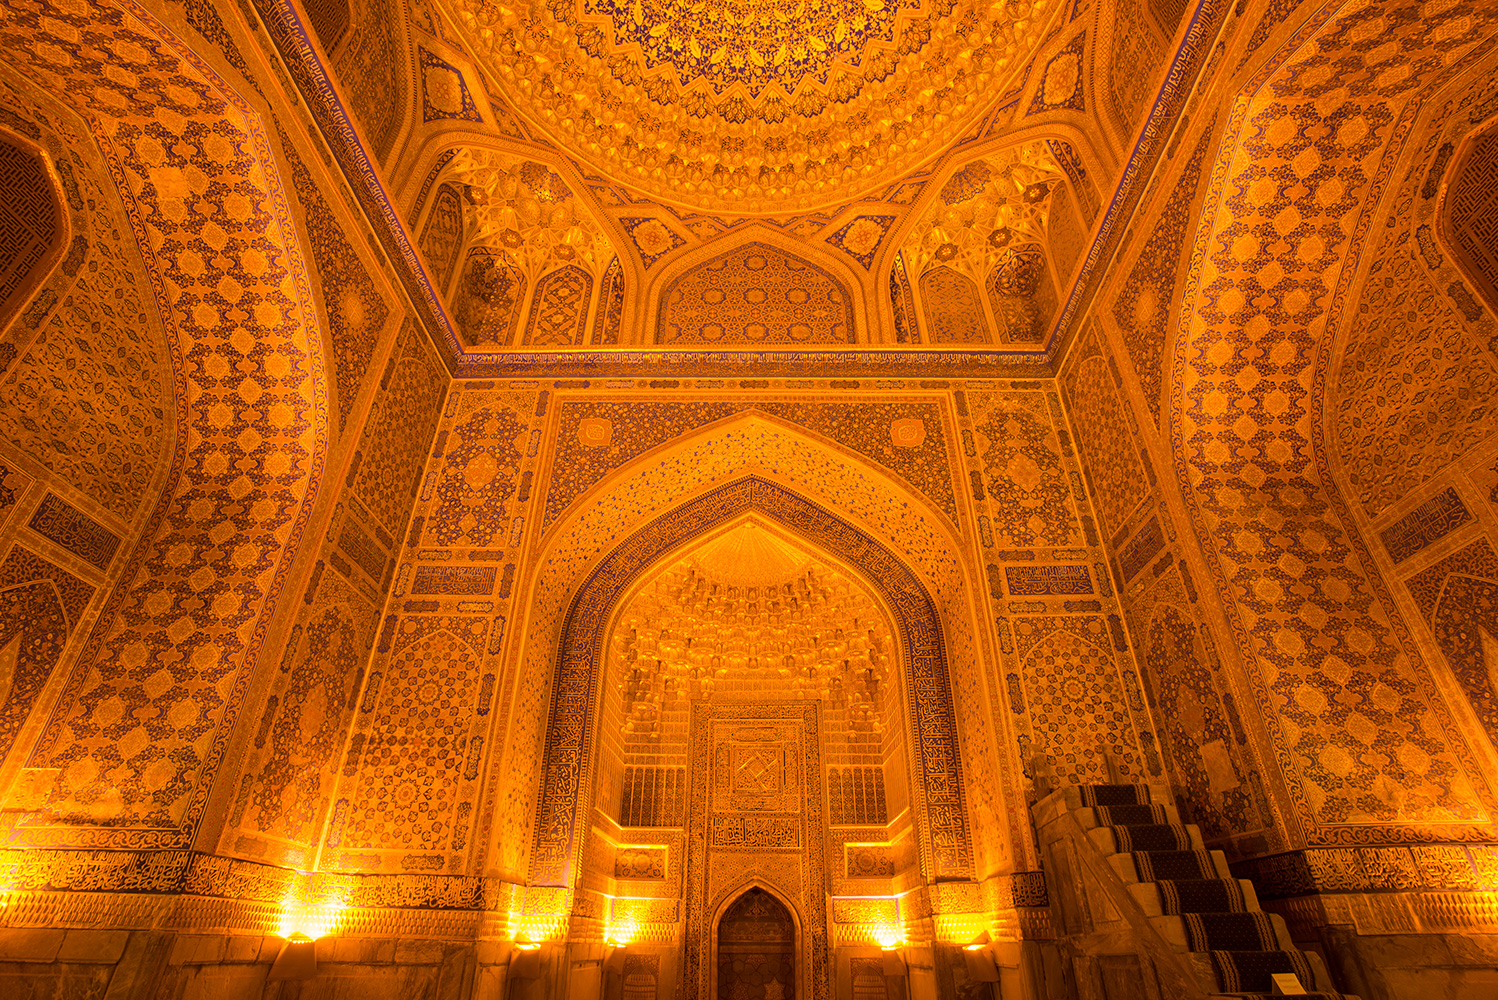 The interior at night. The amount of gold leaf is breathtaking, and gives the Madrassah its name, which means guilded